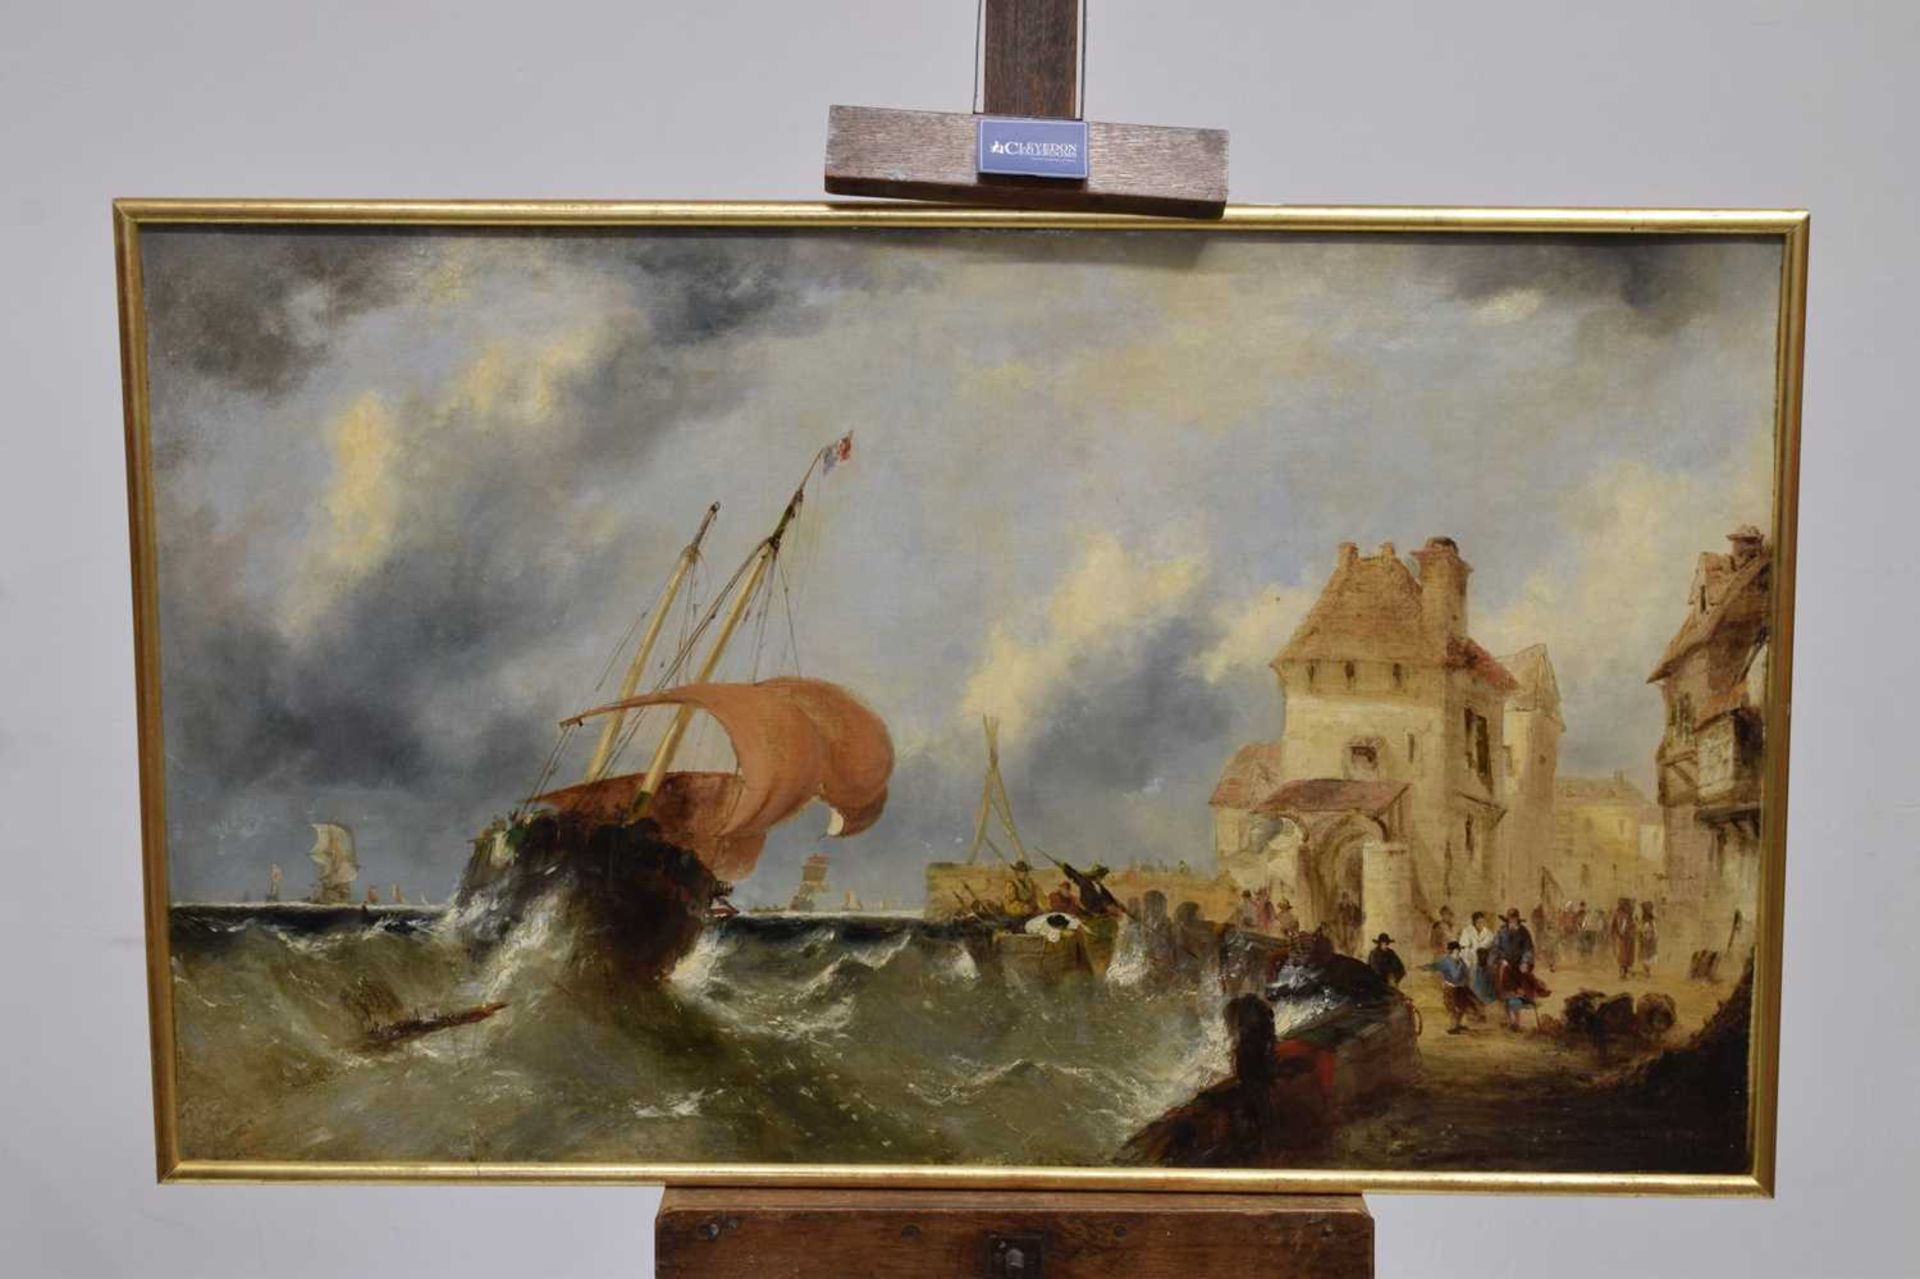 19th century continental school - Oil on canvas - Ship in a stormy coastal port - Image 2 of 19